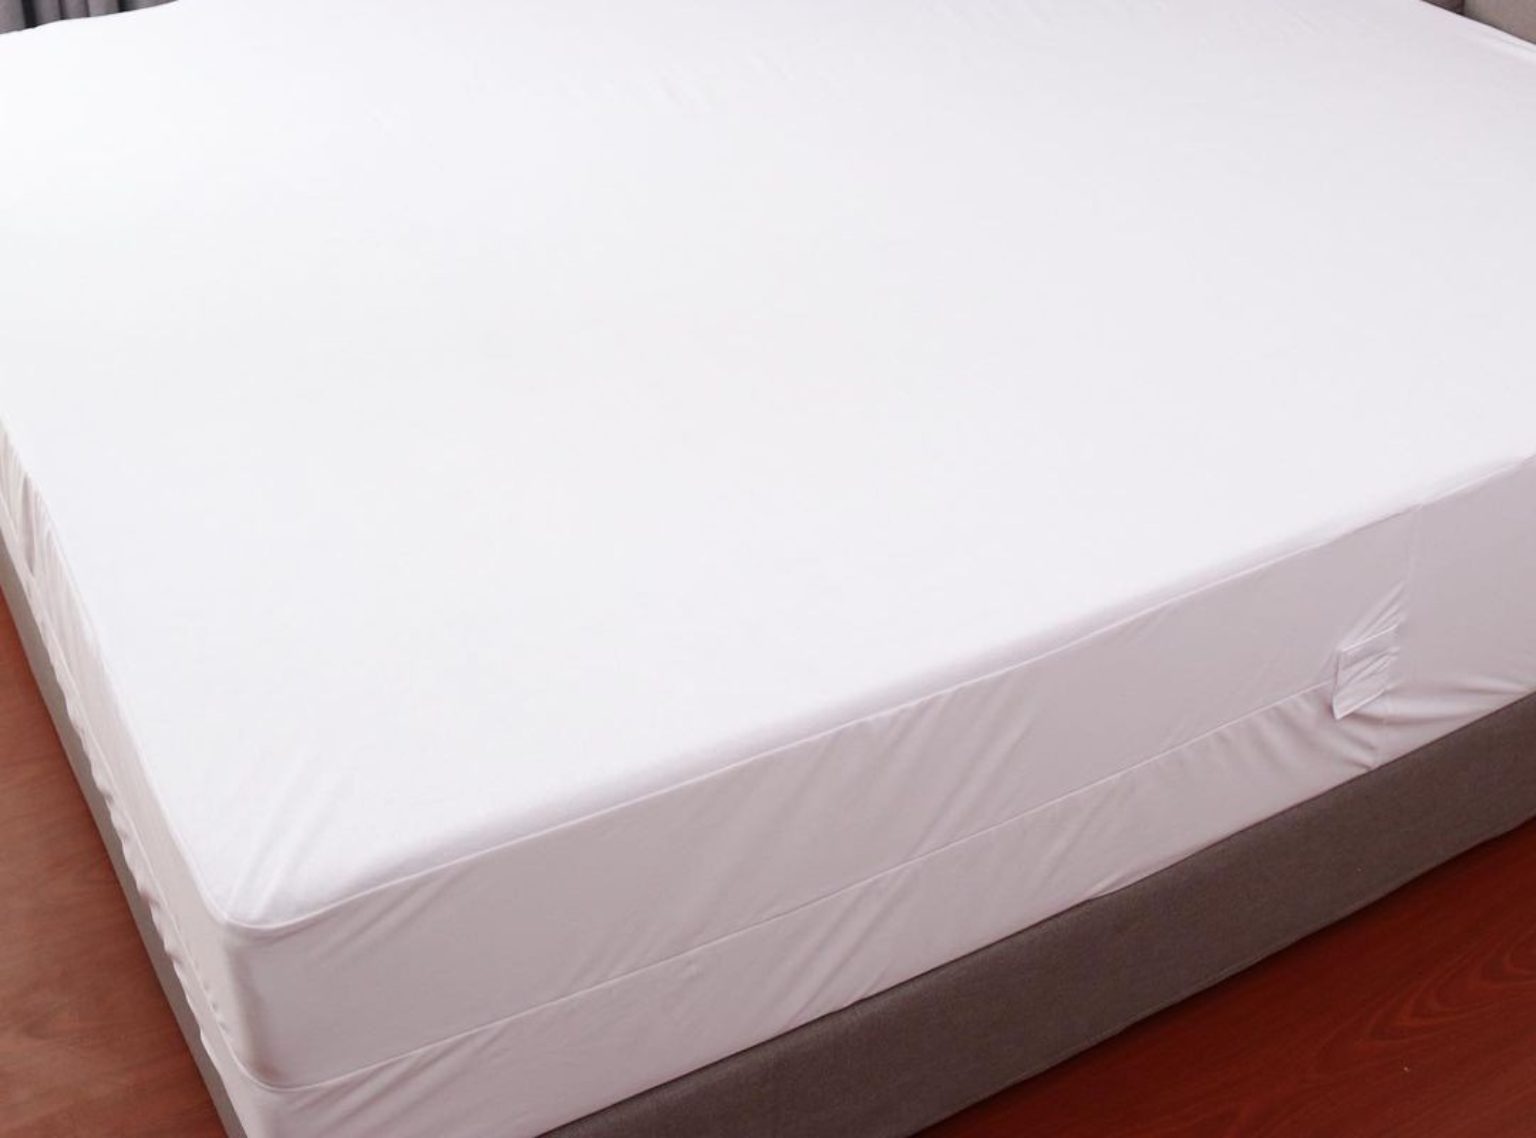 bed bug mattress cover king size